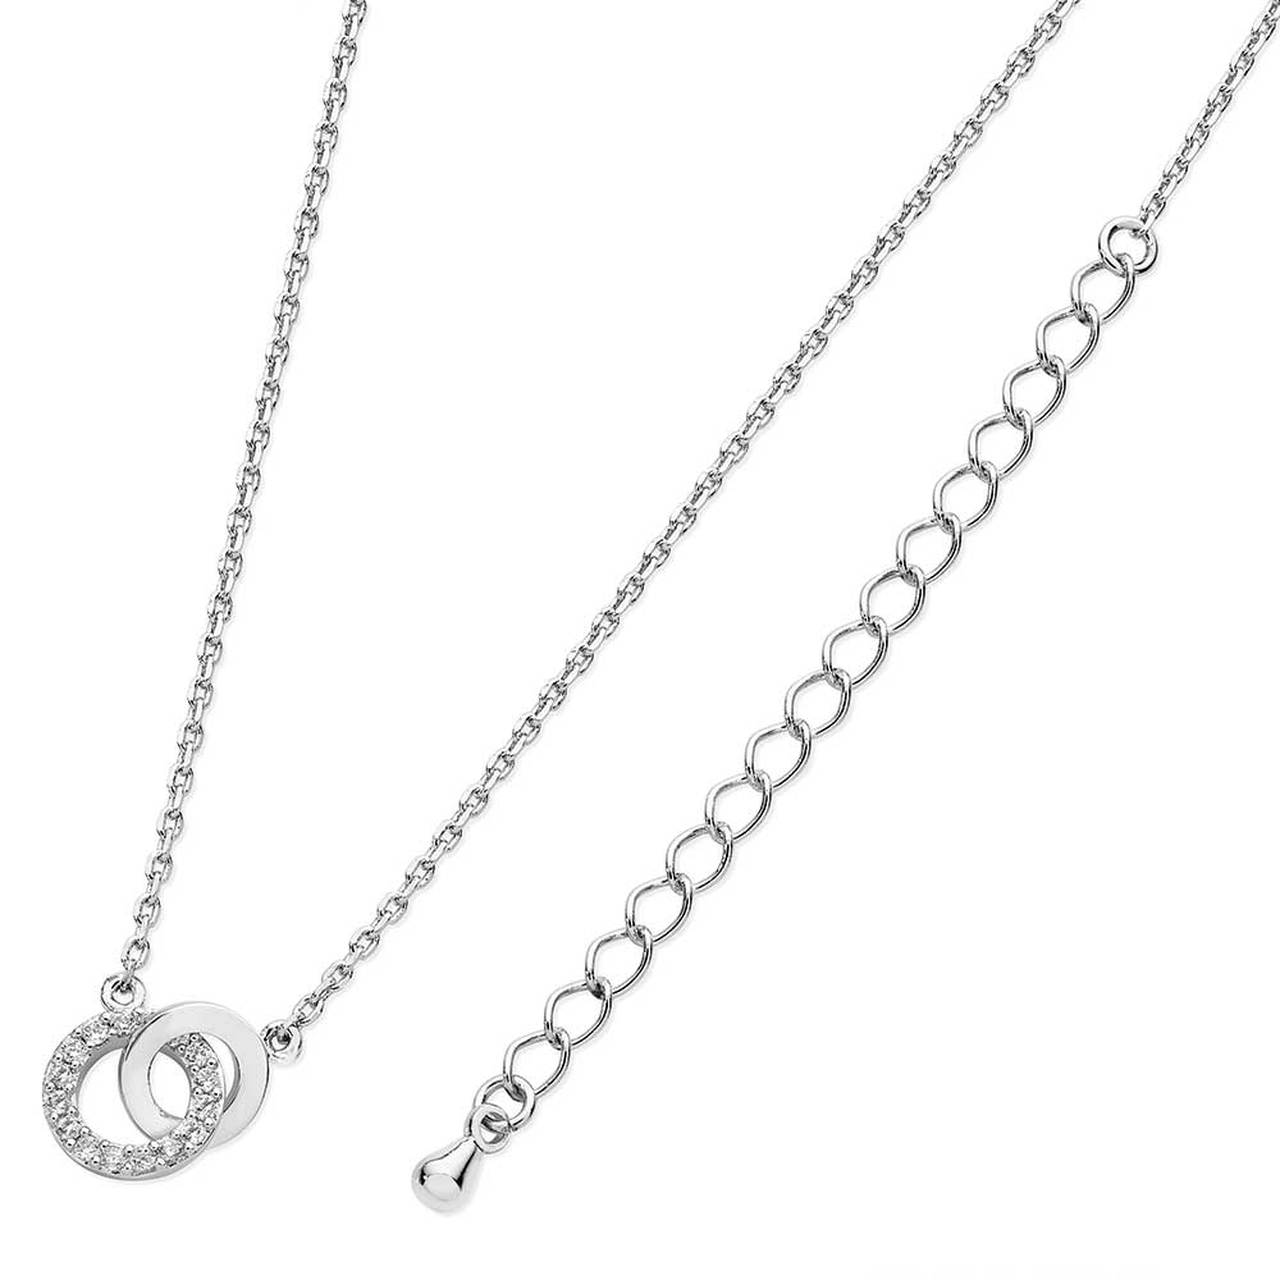 Silver Polished & CZ Circle Pendant - Tipperary Crystal  Forever sparkling, this symbolic necklace is a glistening symbol of forever love. Fashioned in cool silver the design joins one polished open circle with a larger open circle lined with brilliantly cut round clear crystals. A thoughtful gift for the one you love, this dazzling duo is buffed to a brilliant lustre and suspends centered along a cable chain that secures with a lobster claw clasp.